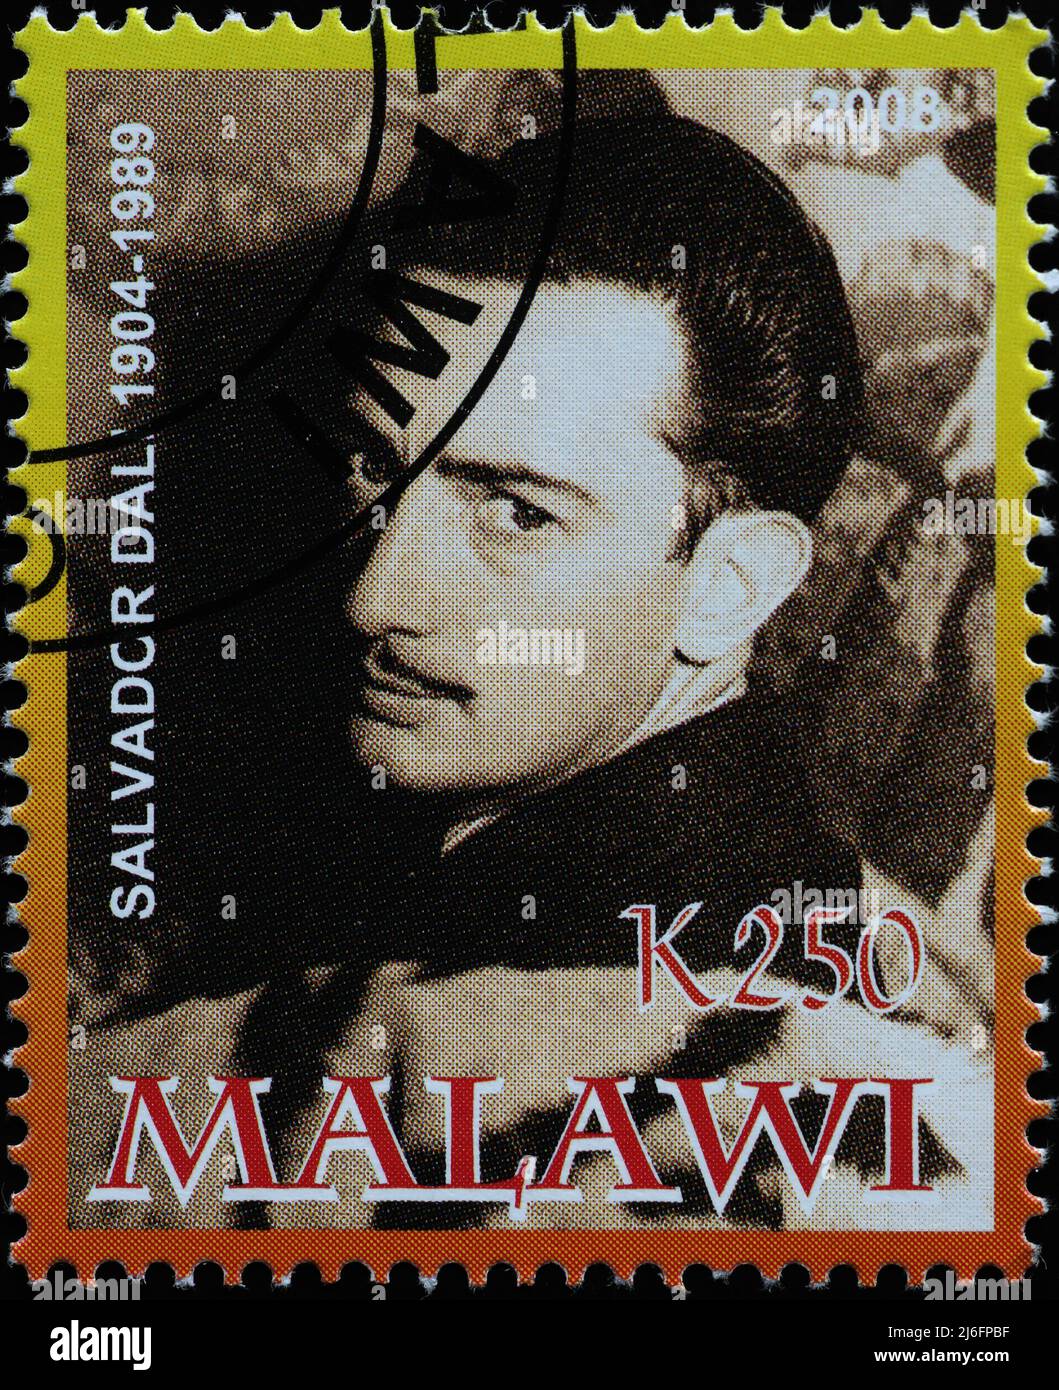 Picture of Salvador Dalì on postage stamp Stock Photo